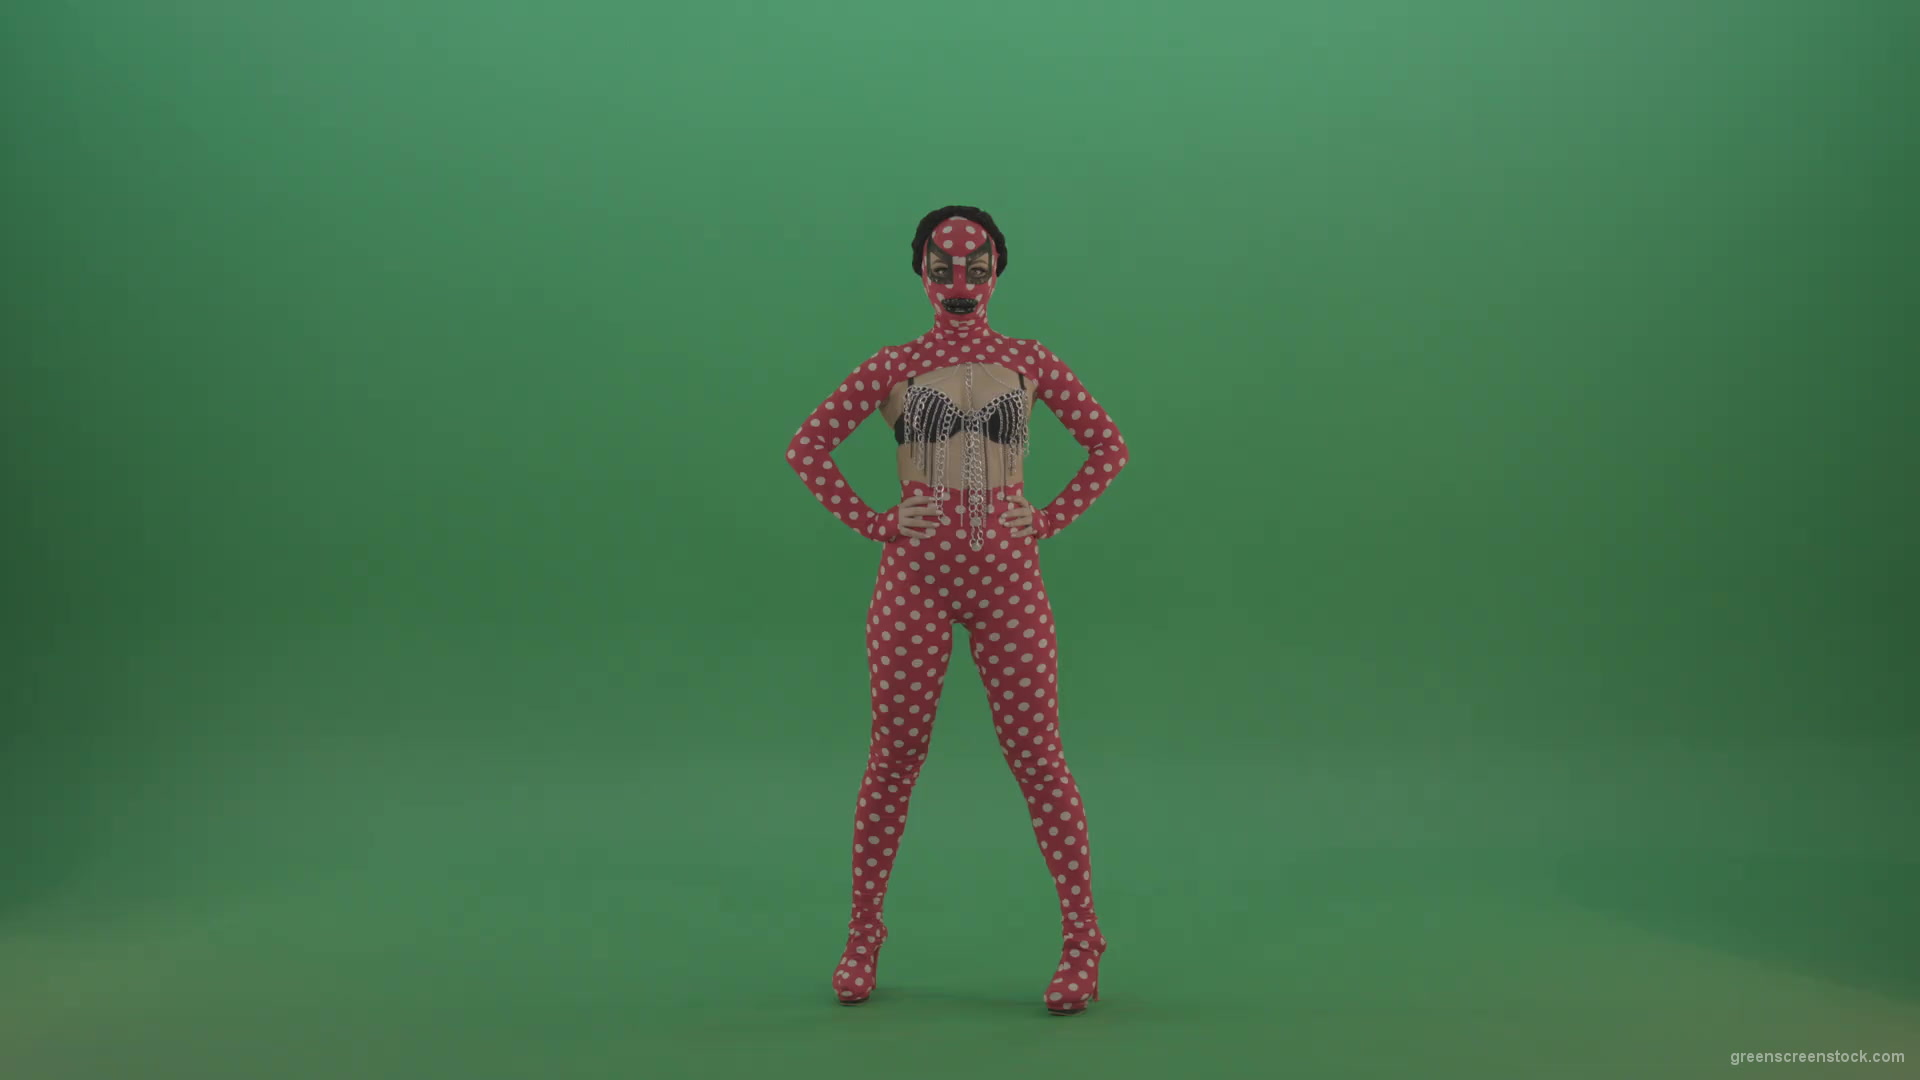 Girl-with-big-black-lipps-and-red-fetish-costume-posing-and-sitting-down-on-green-screen-1920_001 Green Screen Stock